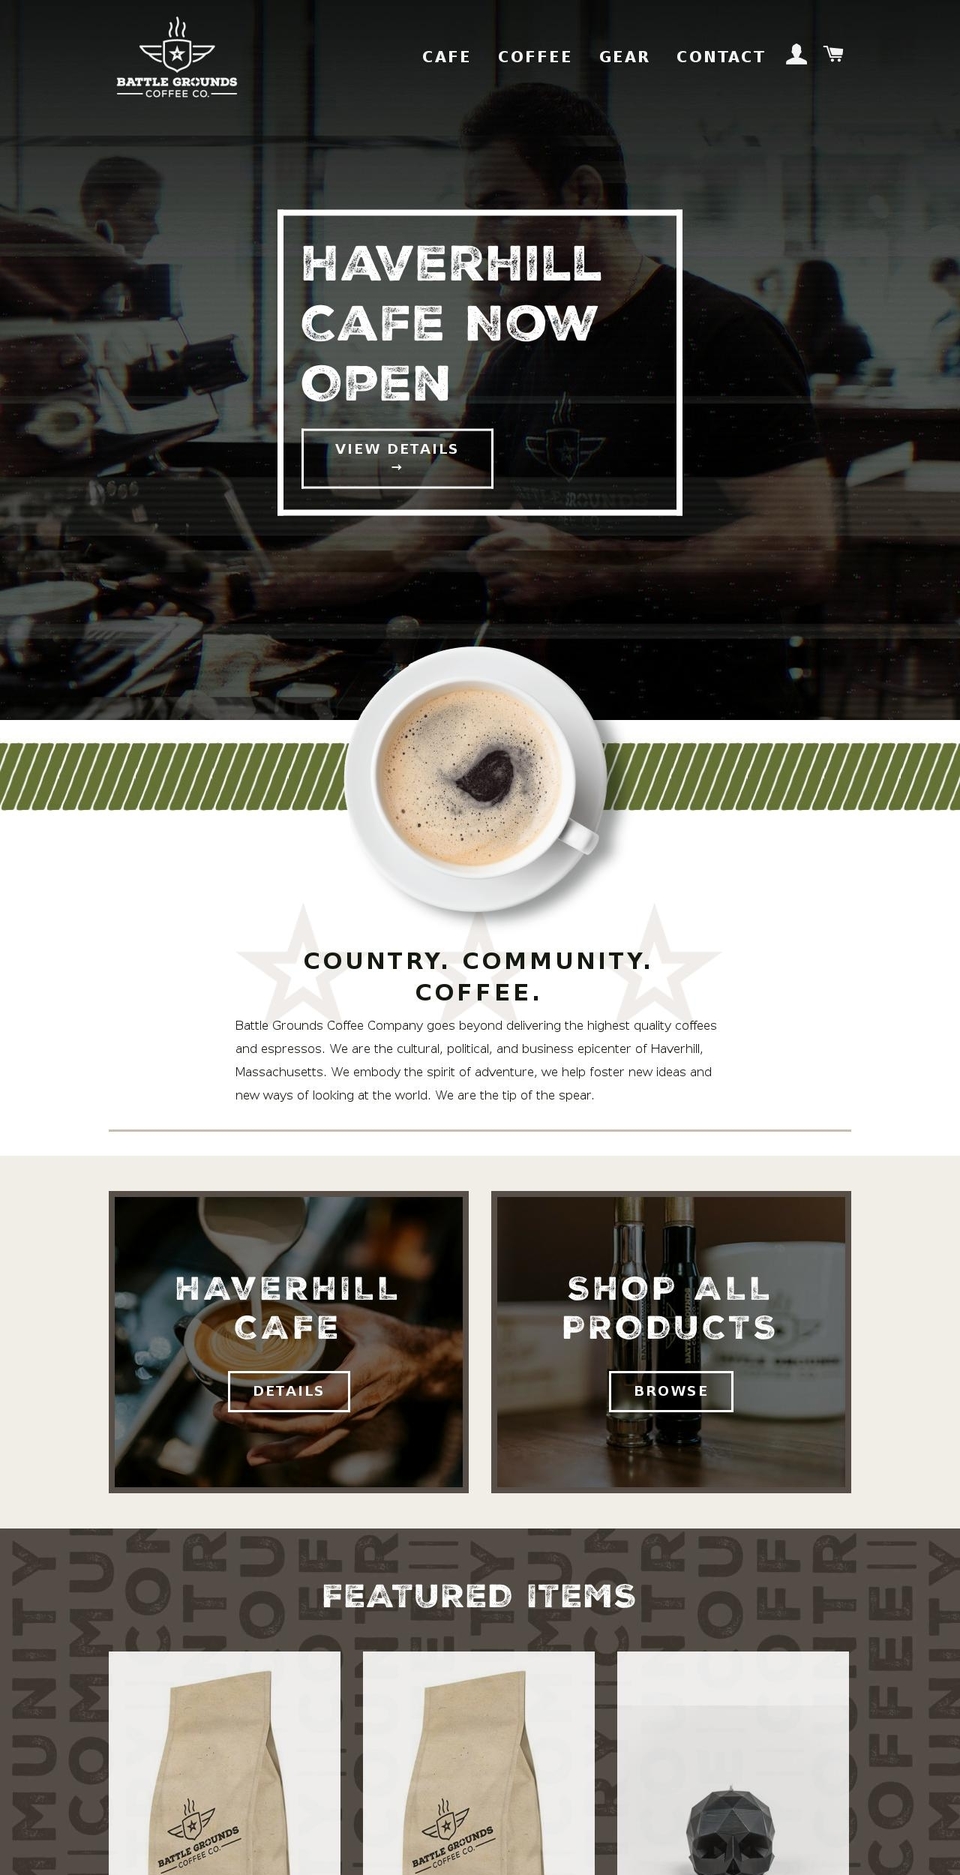 Battle Grounds Coffee Co Shopify theme site example bgcoffees.com